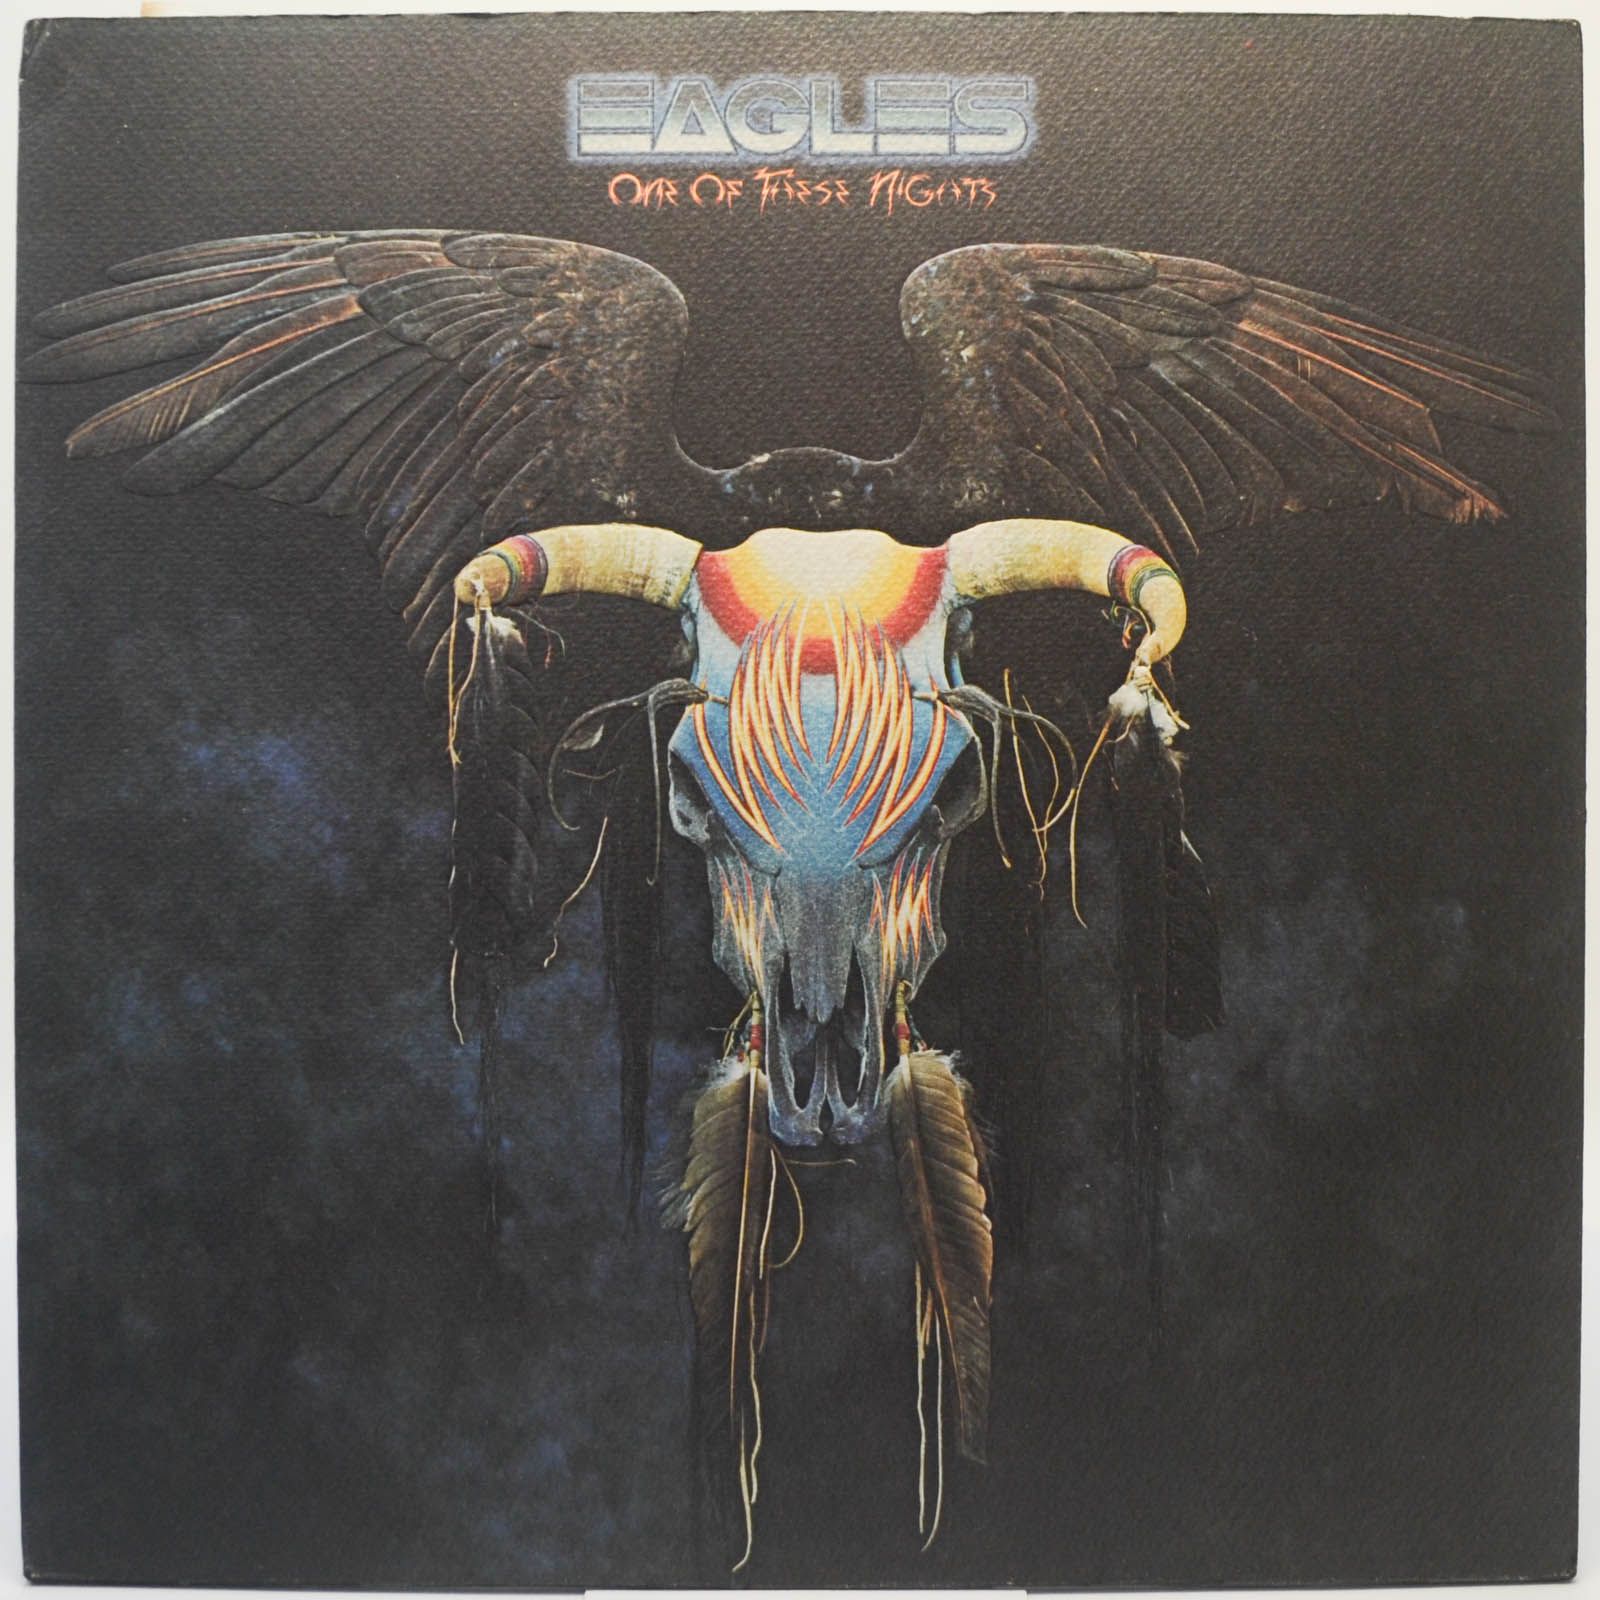 Eagles — One Of These Nights, 1975